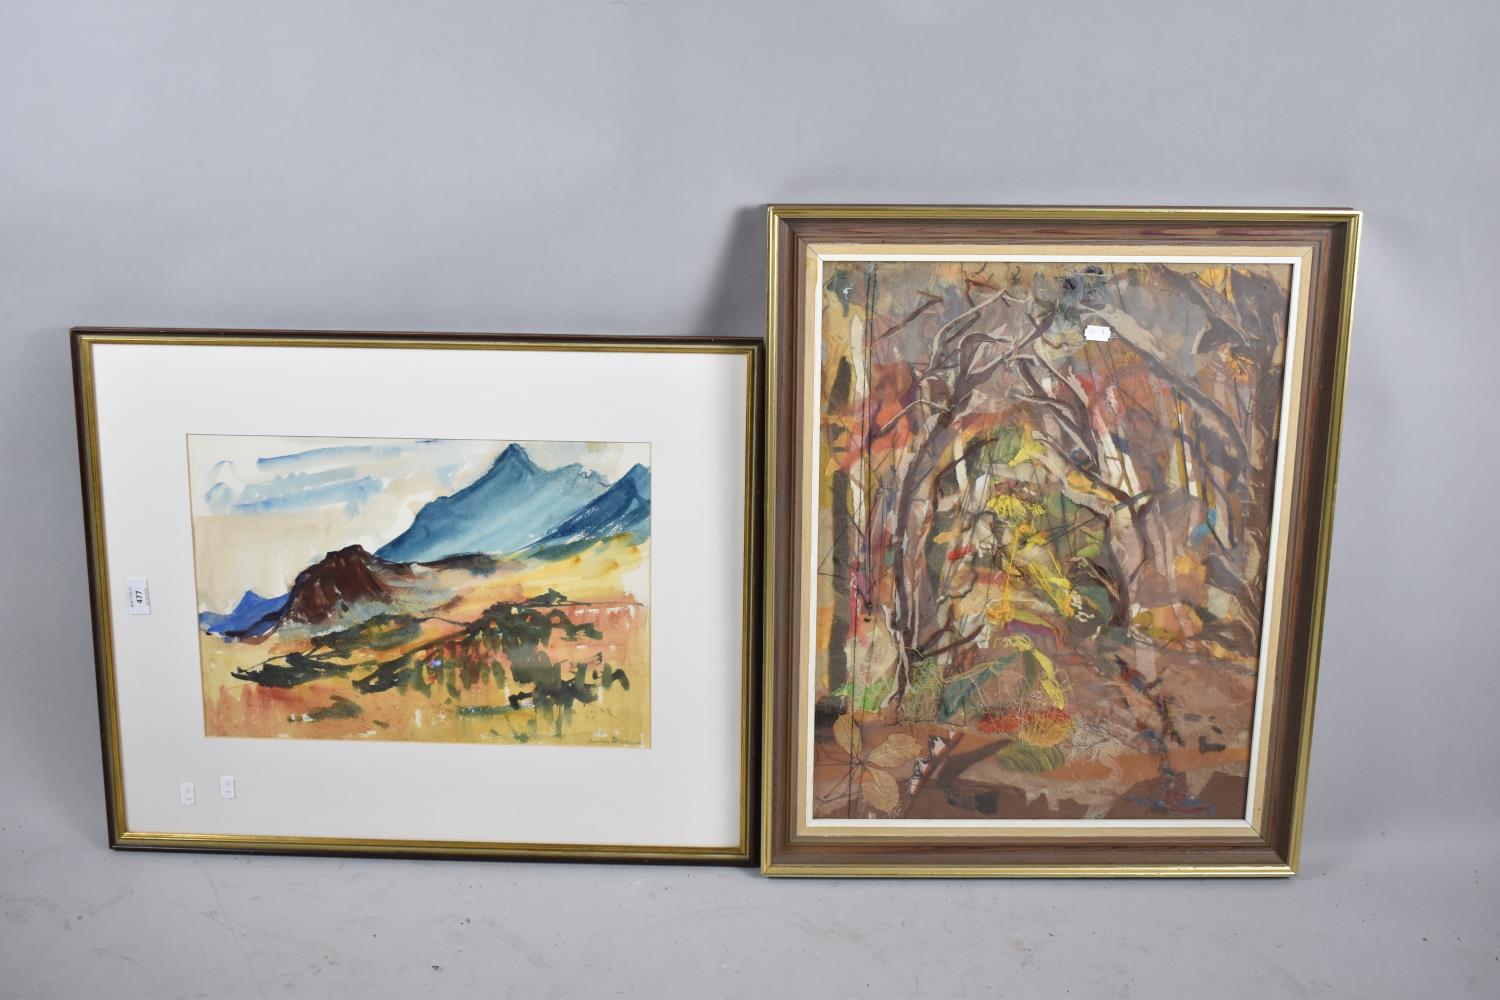 A Framed Scottish Collage, "Deeside Autumn" Together with a Framed Watercolor "The Cuillins, Skye"